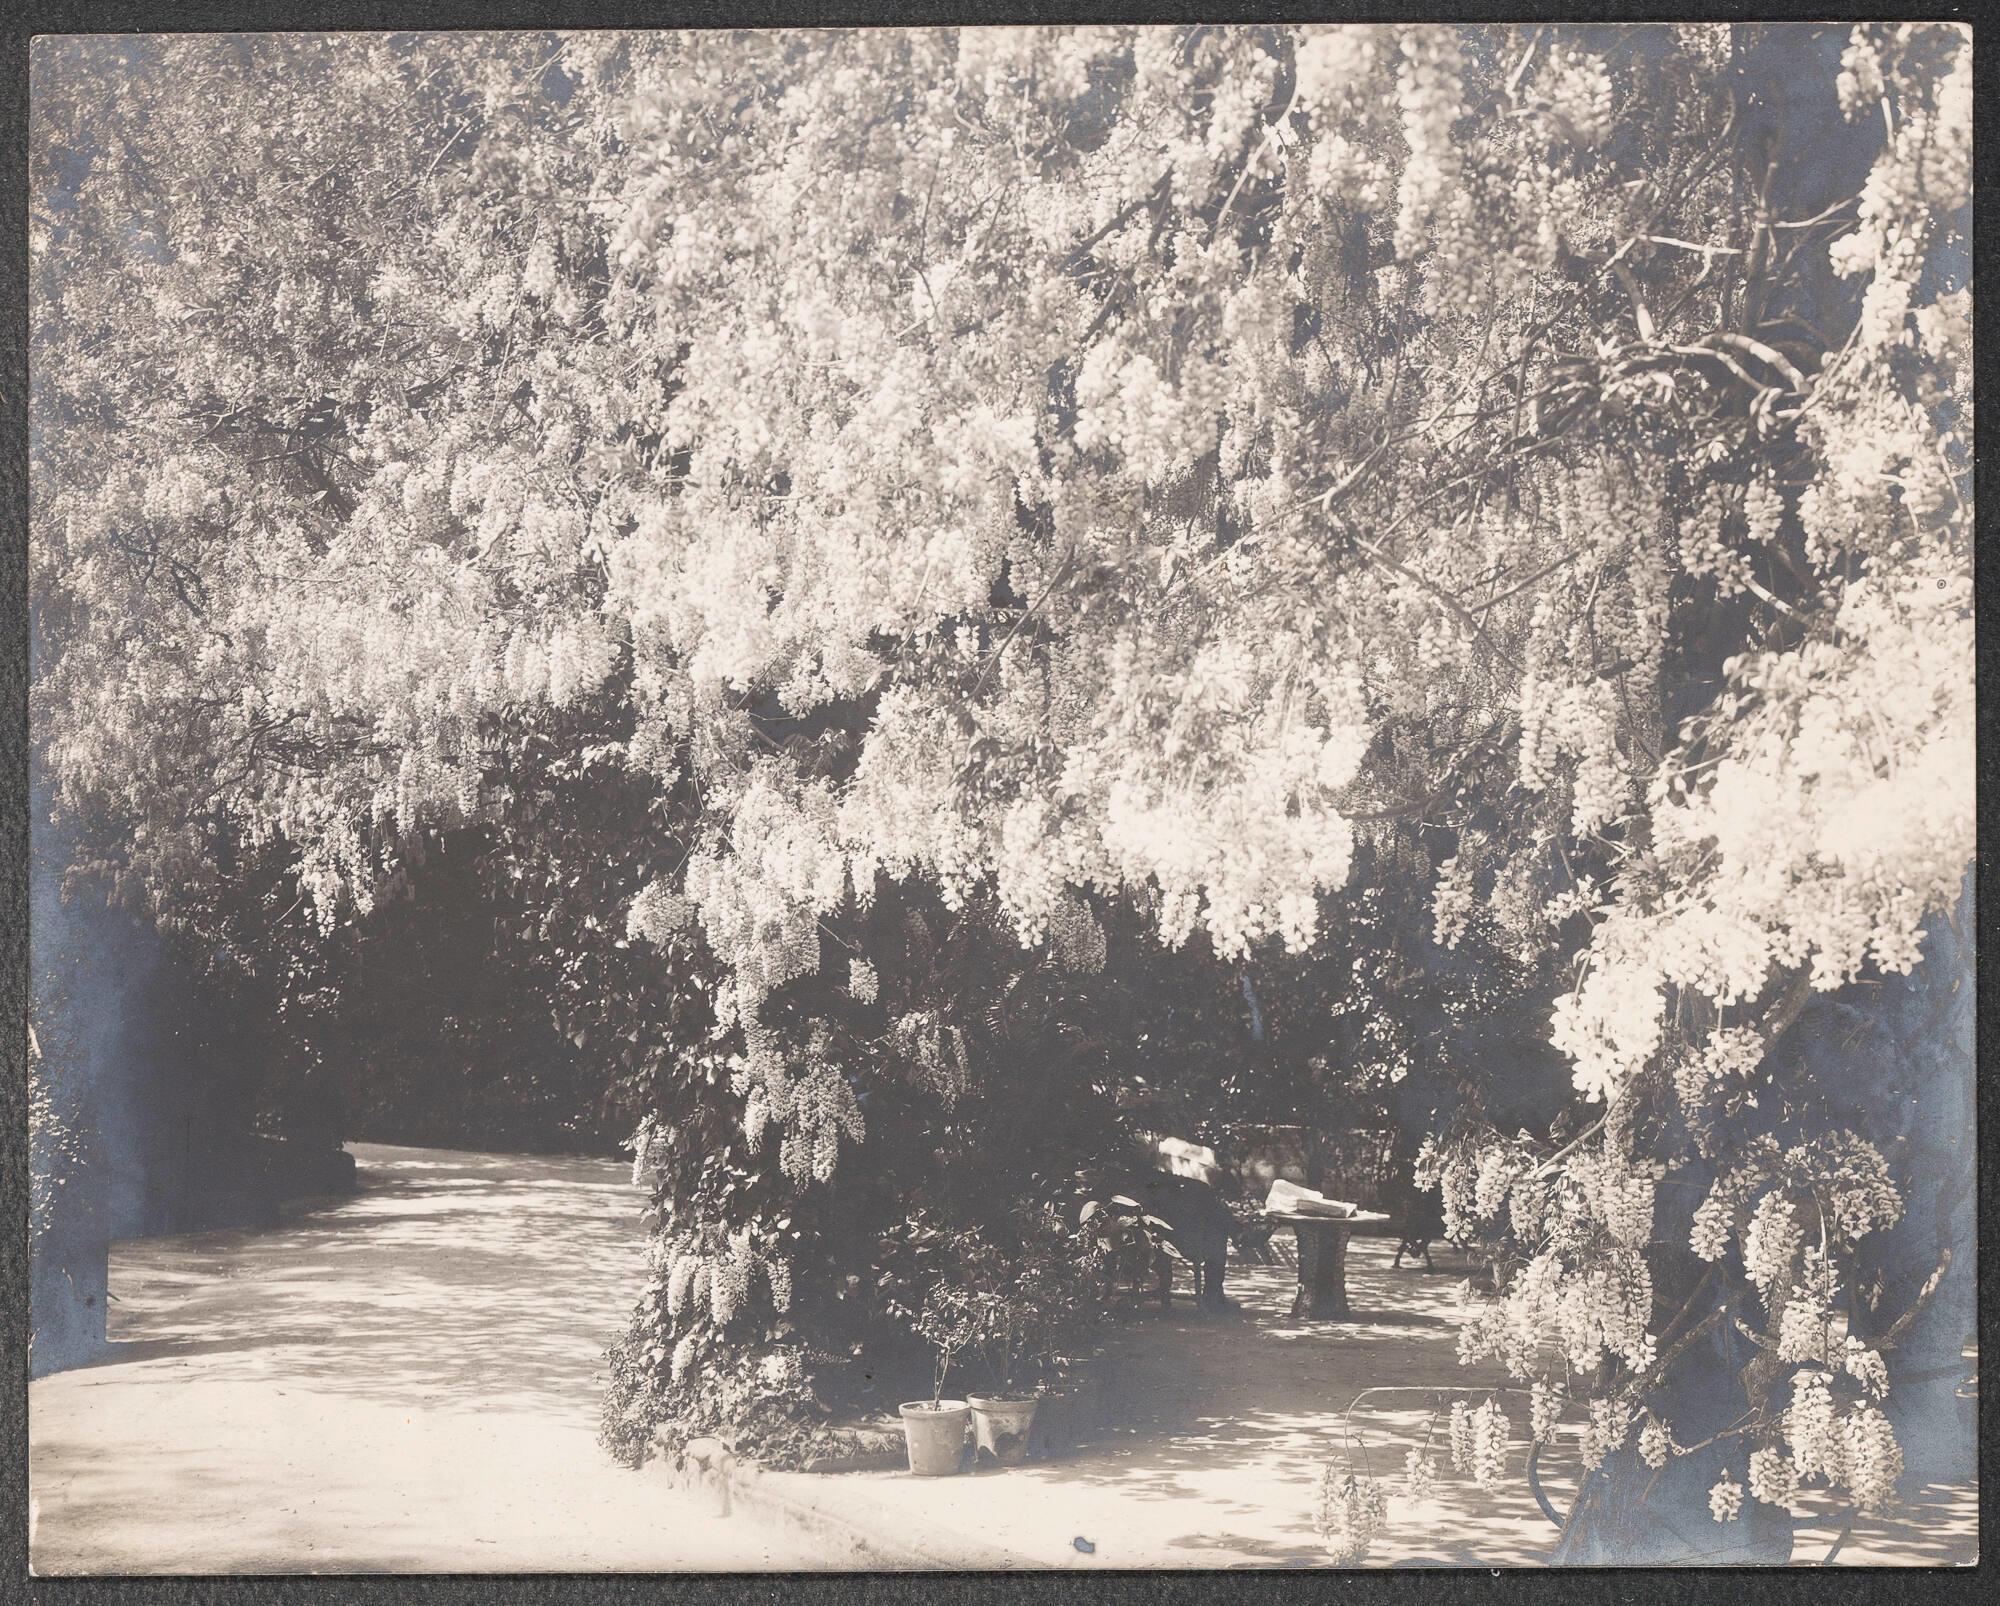 Black and white photograph of a large wisteria vine in an Italian garden.